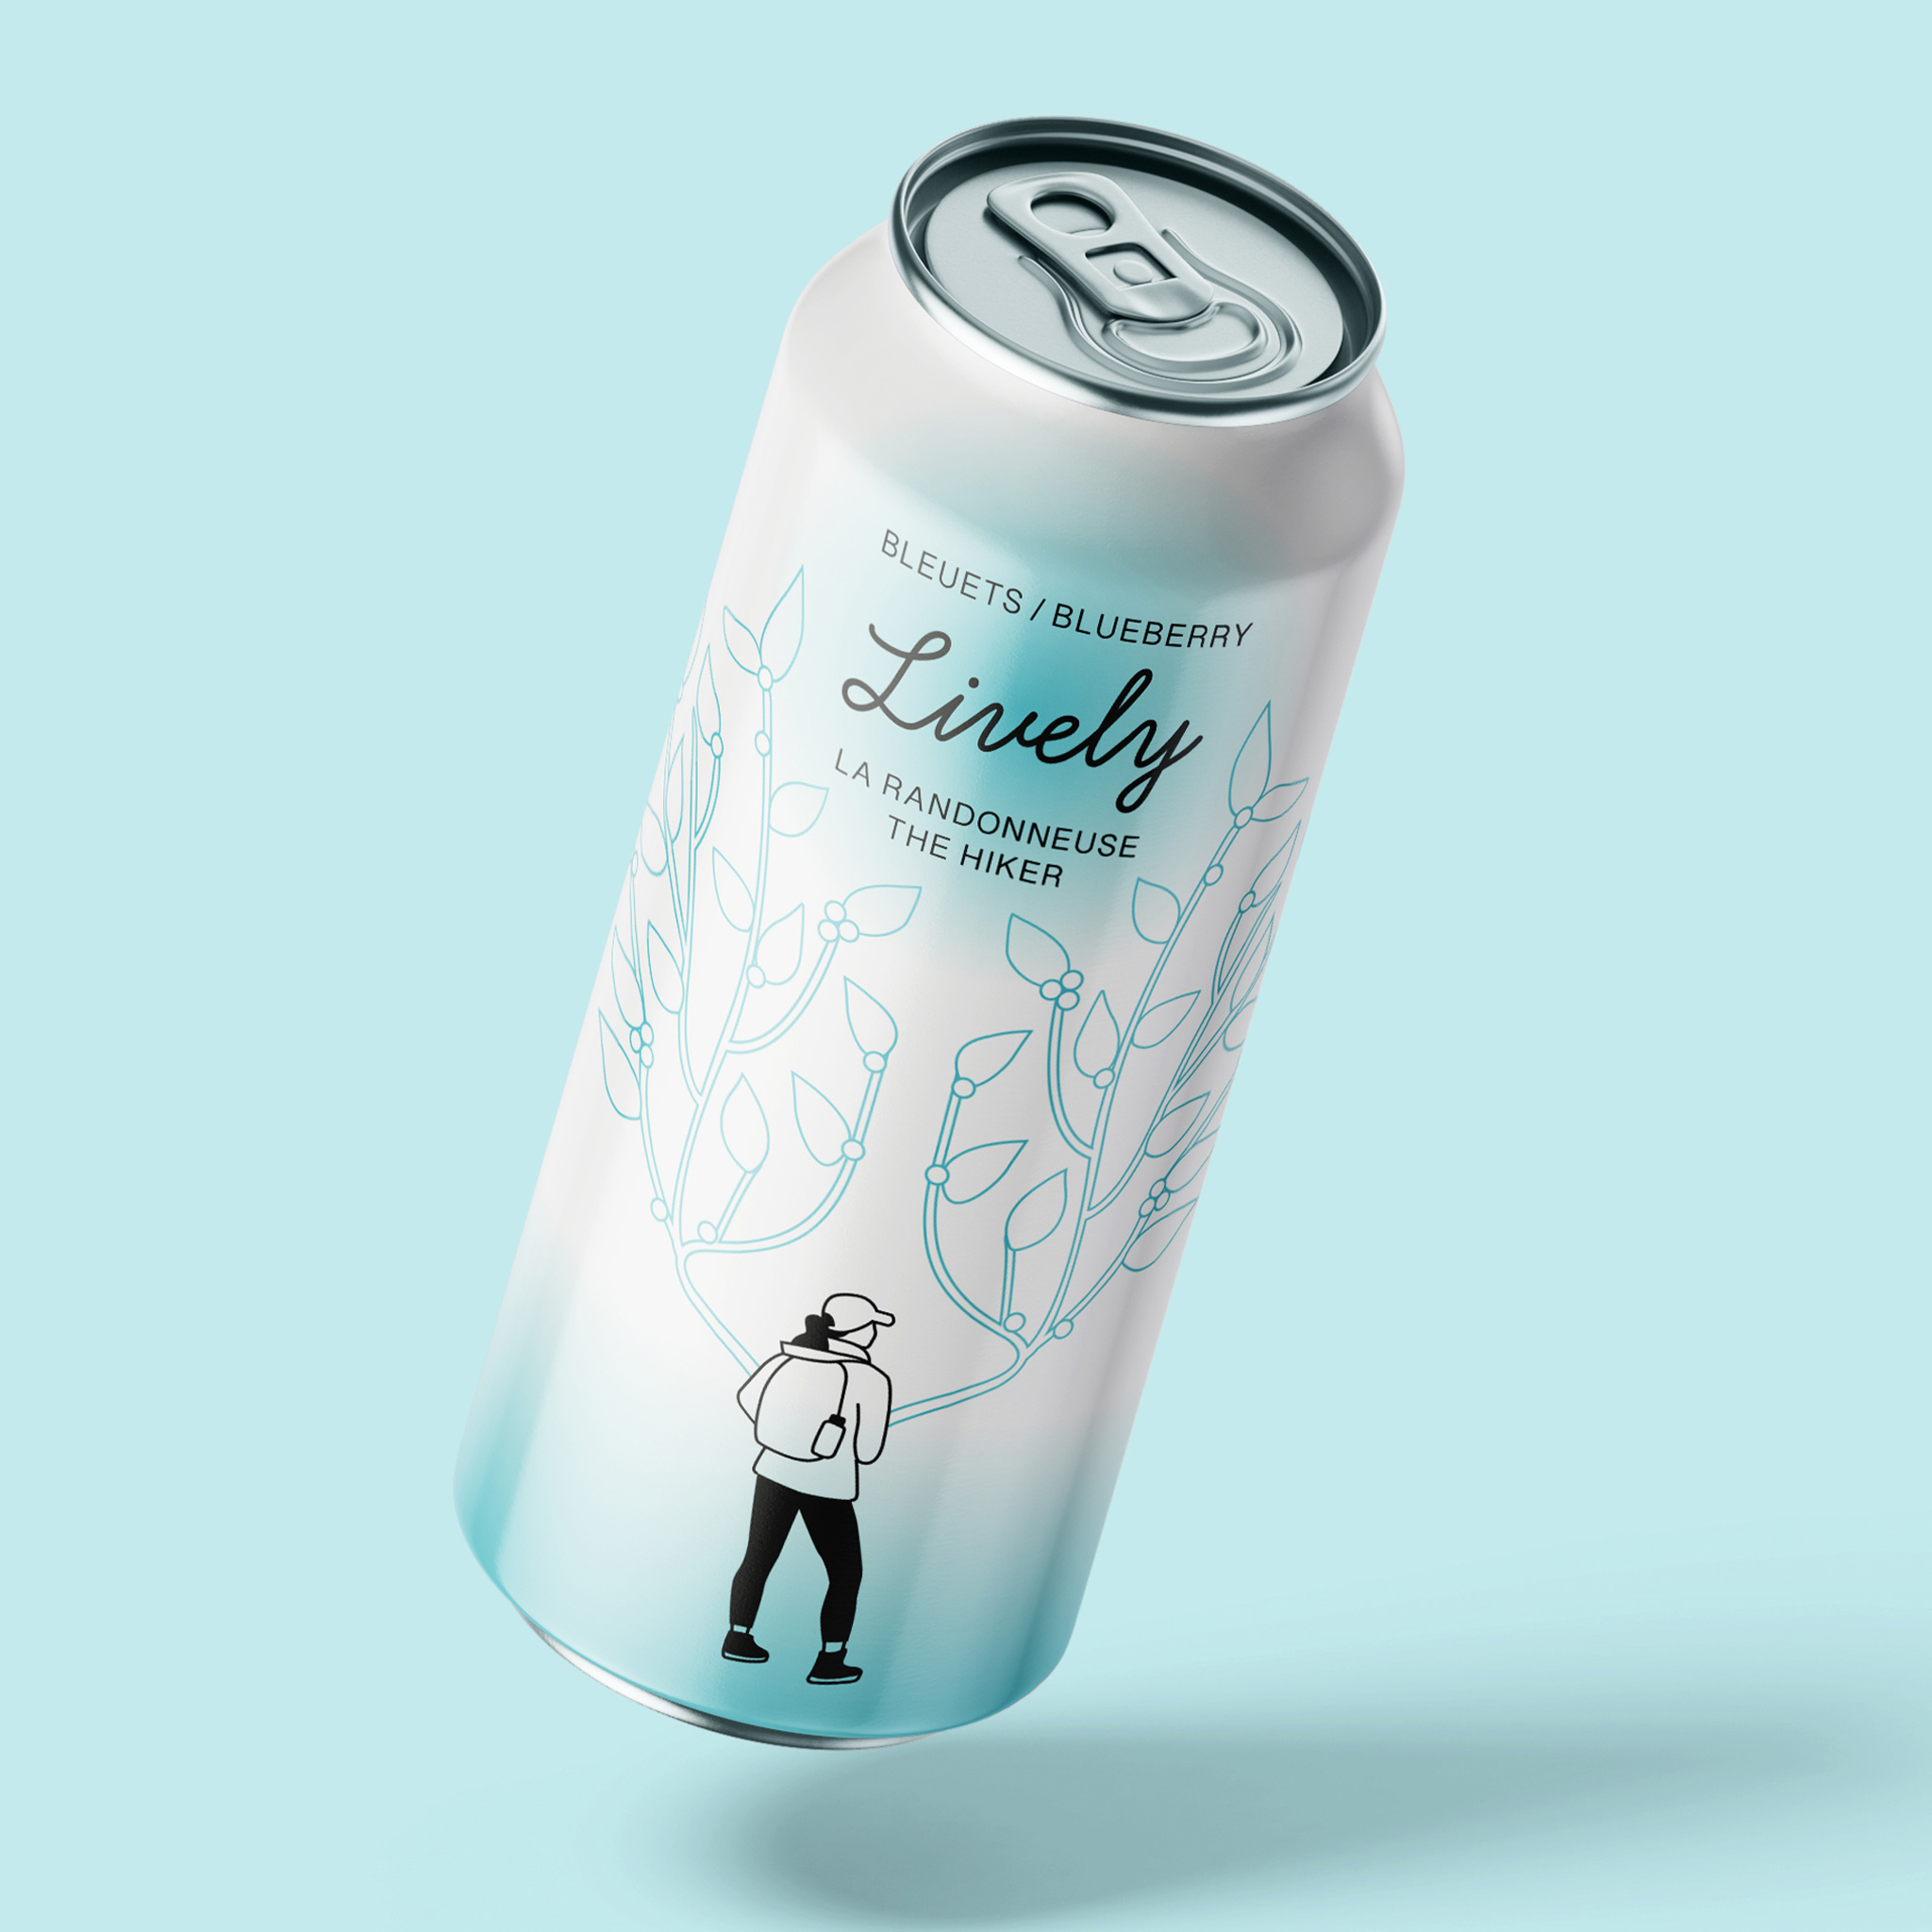 Mockup of packaging design for an imagined all-natural energy drink. This image is an example of a goal, more precisely, of what I would like to create in my career.